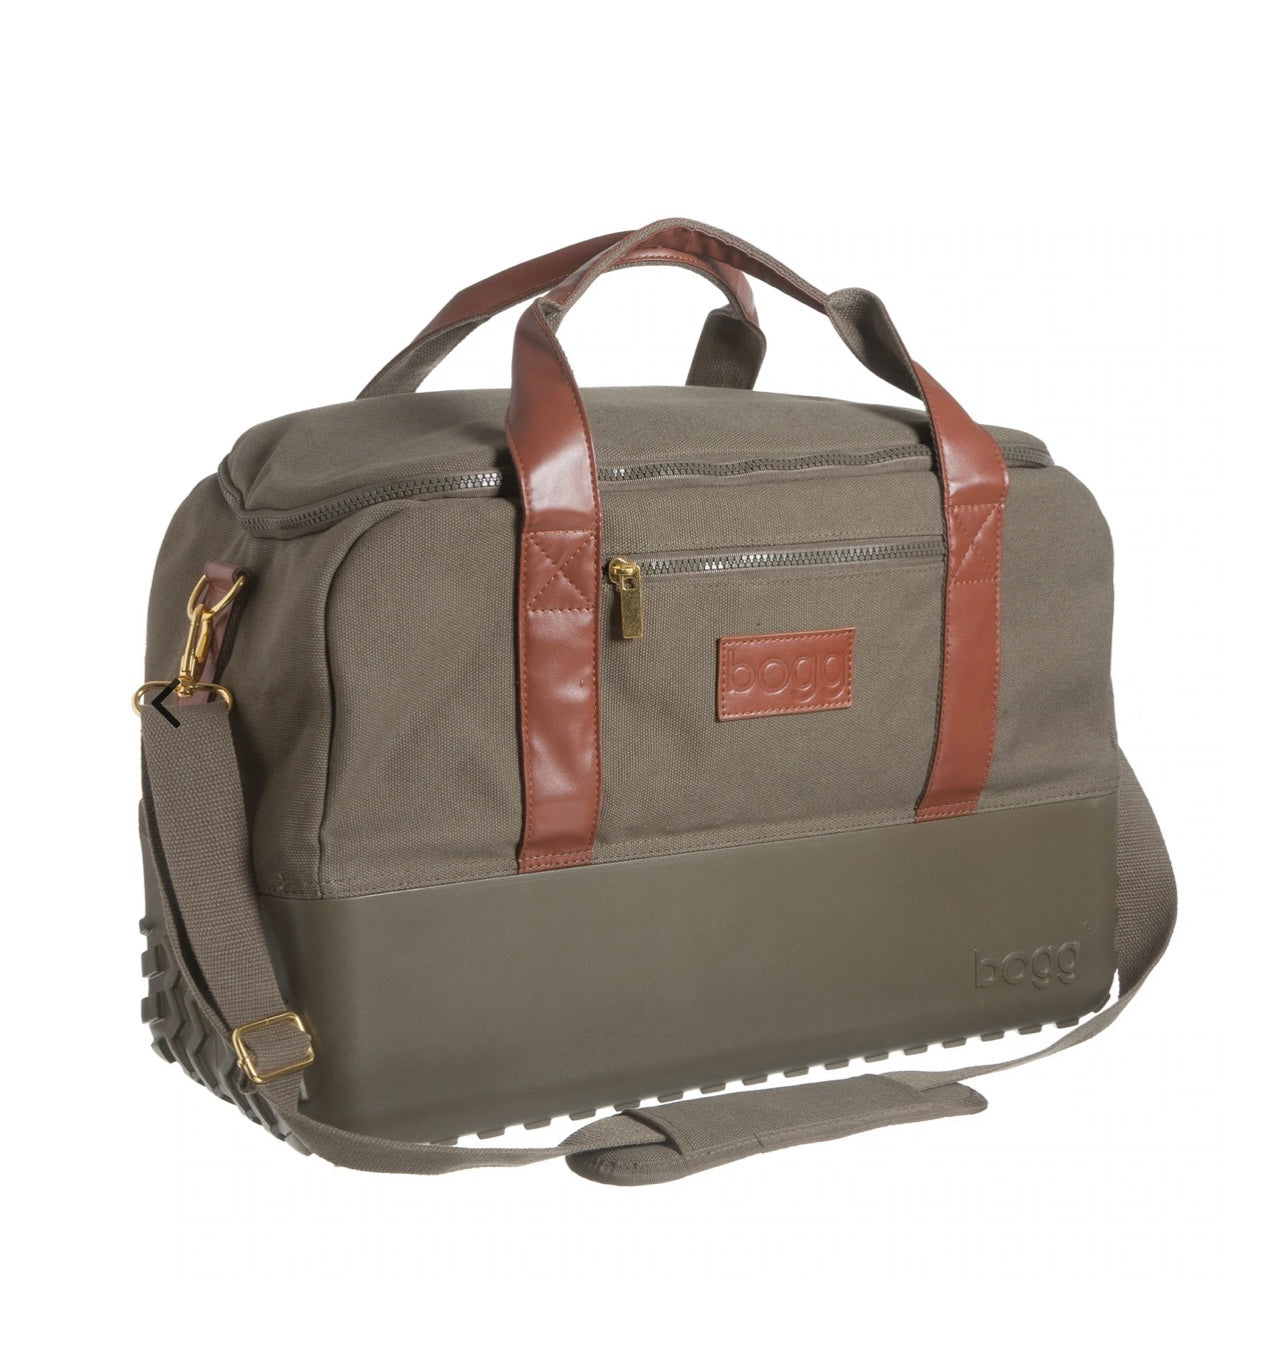 Béis The Weekender Canvas & Faux Leather Bag in Olive